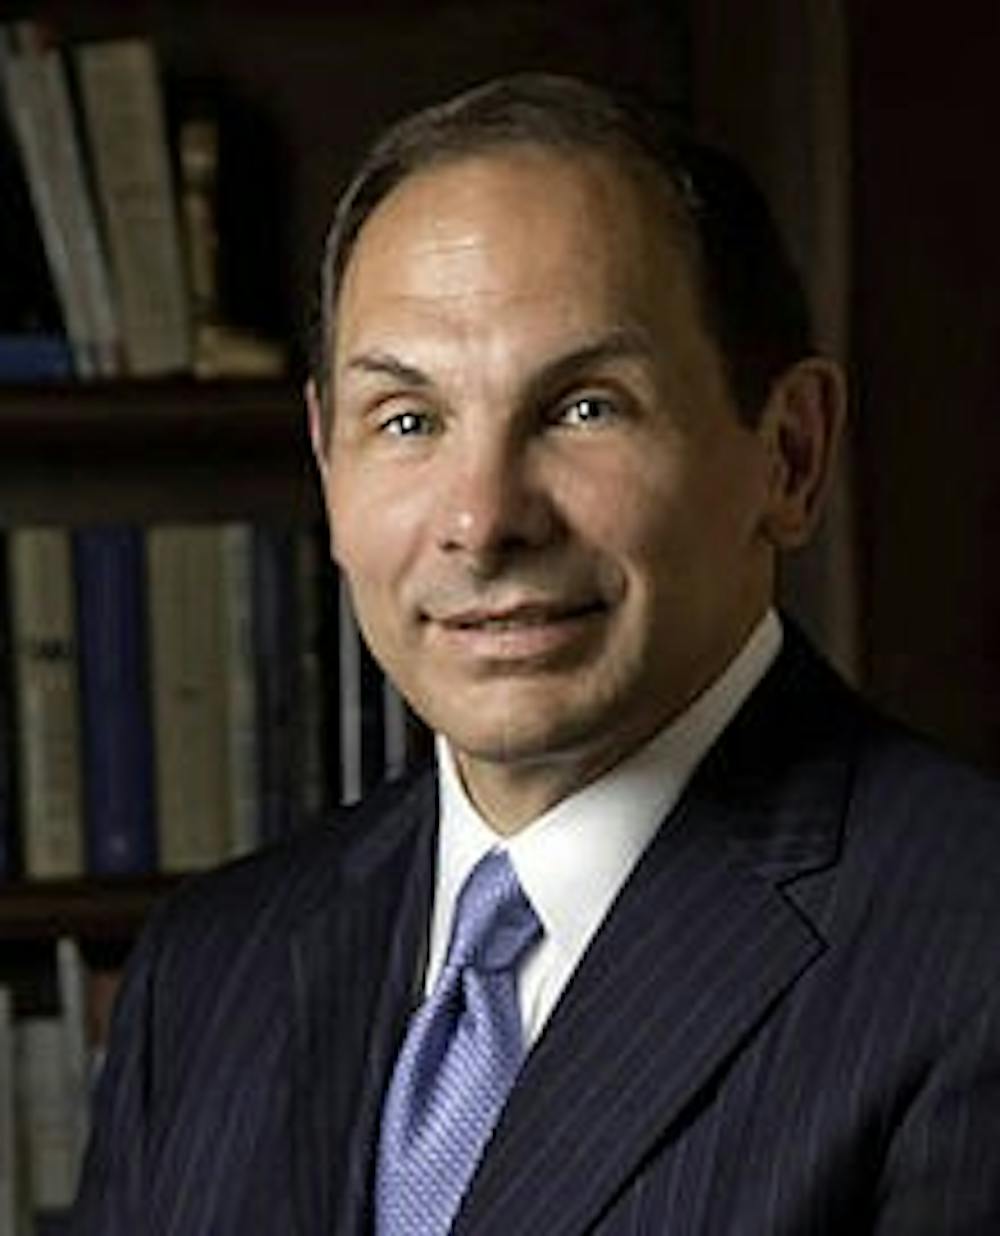 	Bob McDonald is the CEO of Proctor &amp; Gamble. He spoke at the business school Monday.